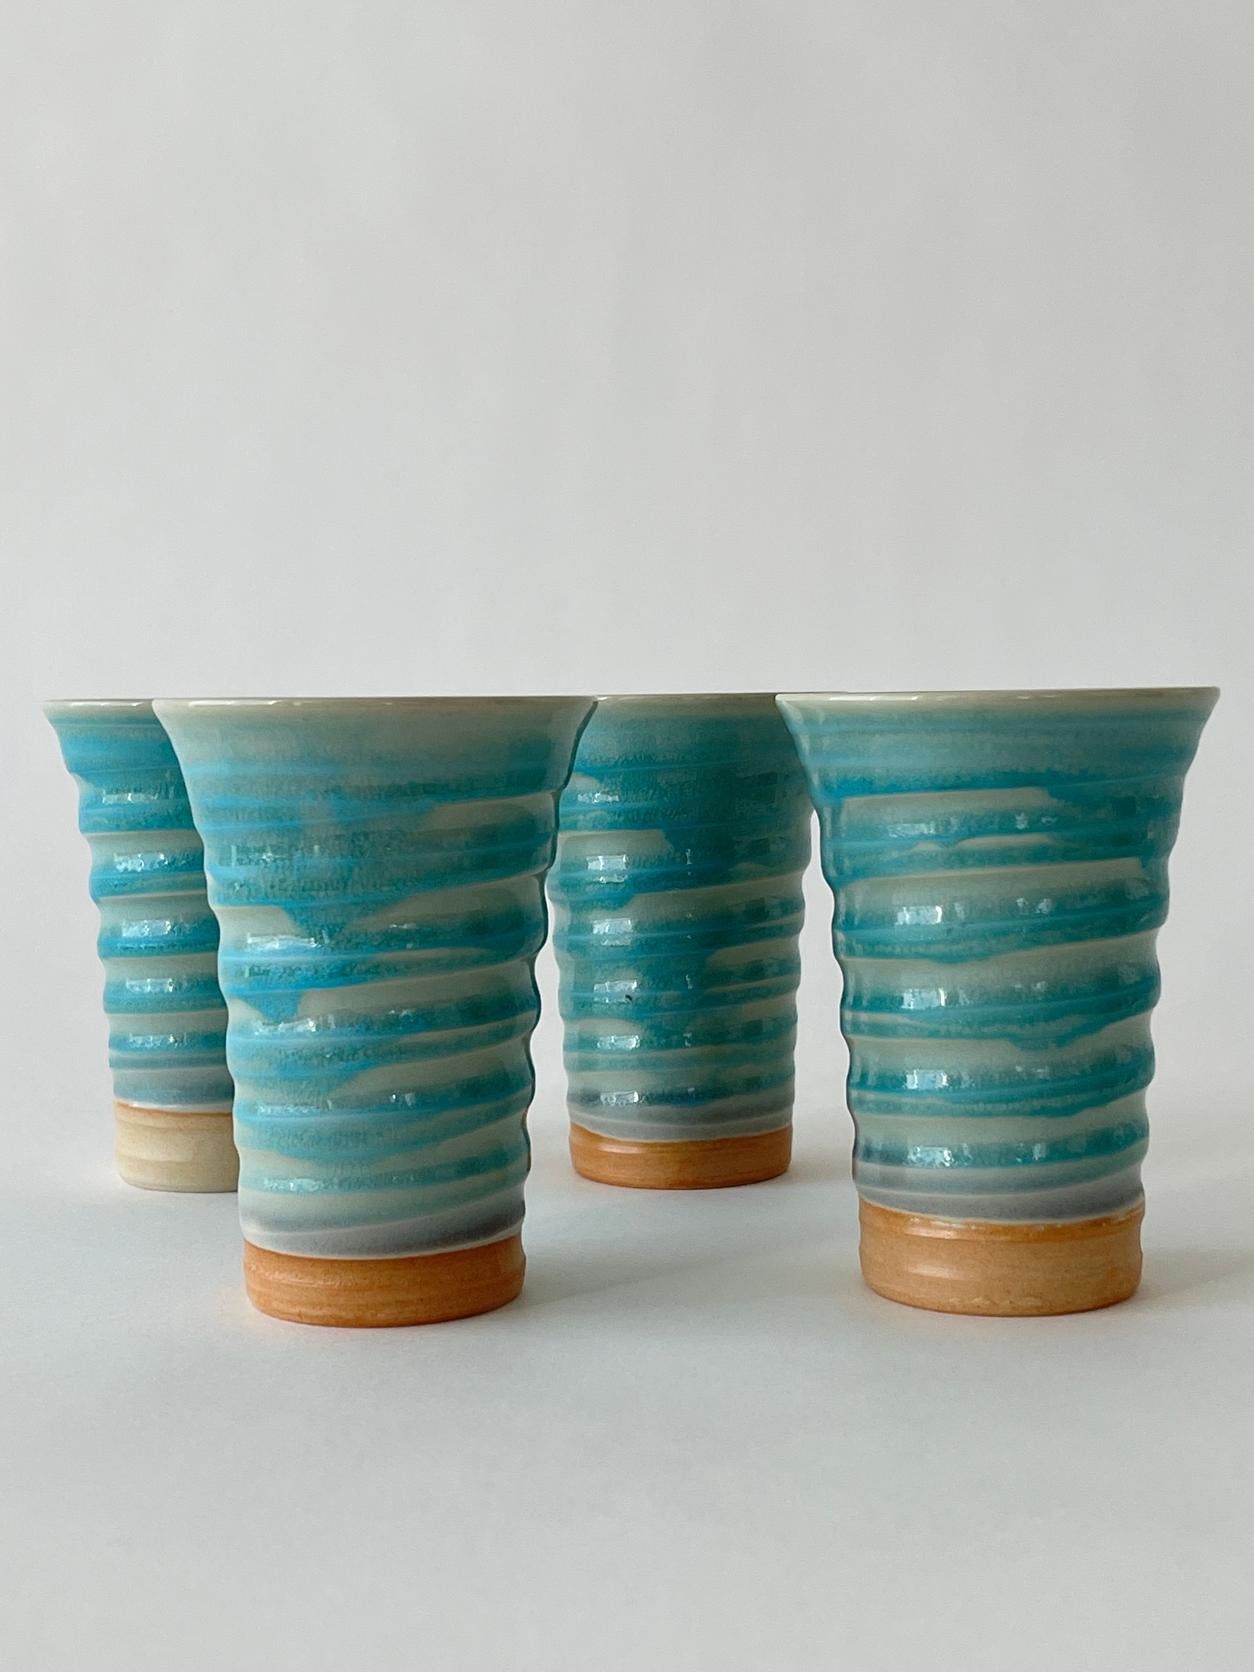 20th century Ceramic ice cream cone glasses in a beautiful baby blue glazed coat and light tan bottom. Ridged sides with a flute opening.

Set of 4
Measures: 3.25